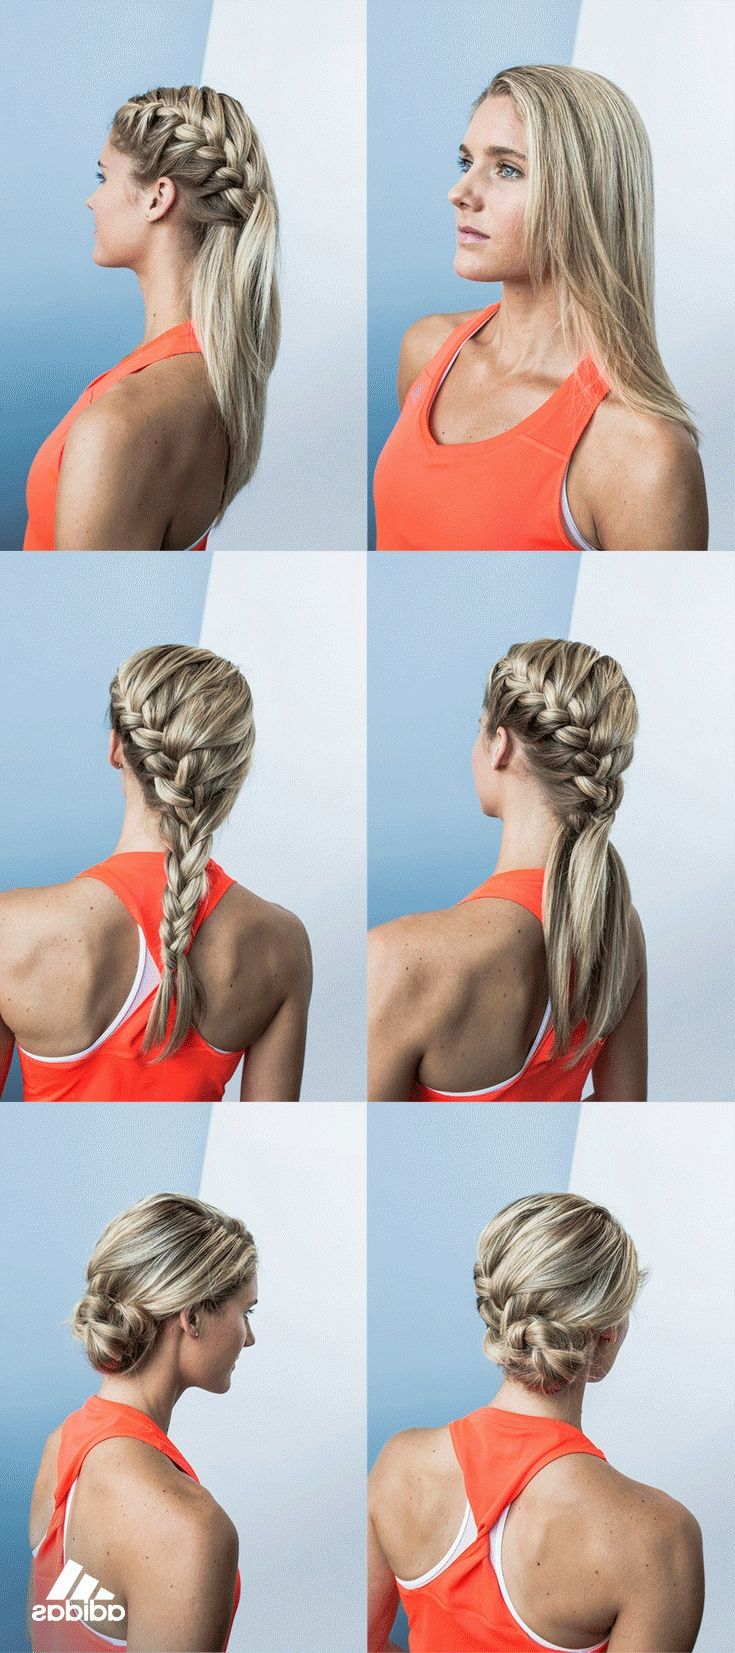 Braided Workout Hairstyles Unique We Love The Way This Style Keeps In Widely Used Braided Gym Hairstyles For Women (View 9 of 15)